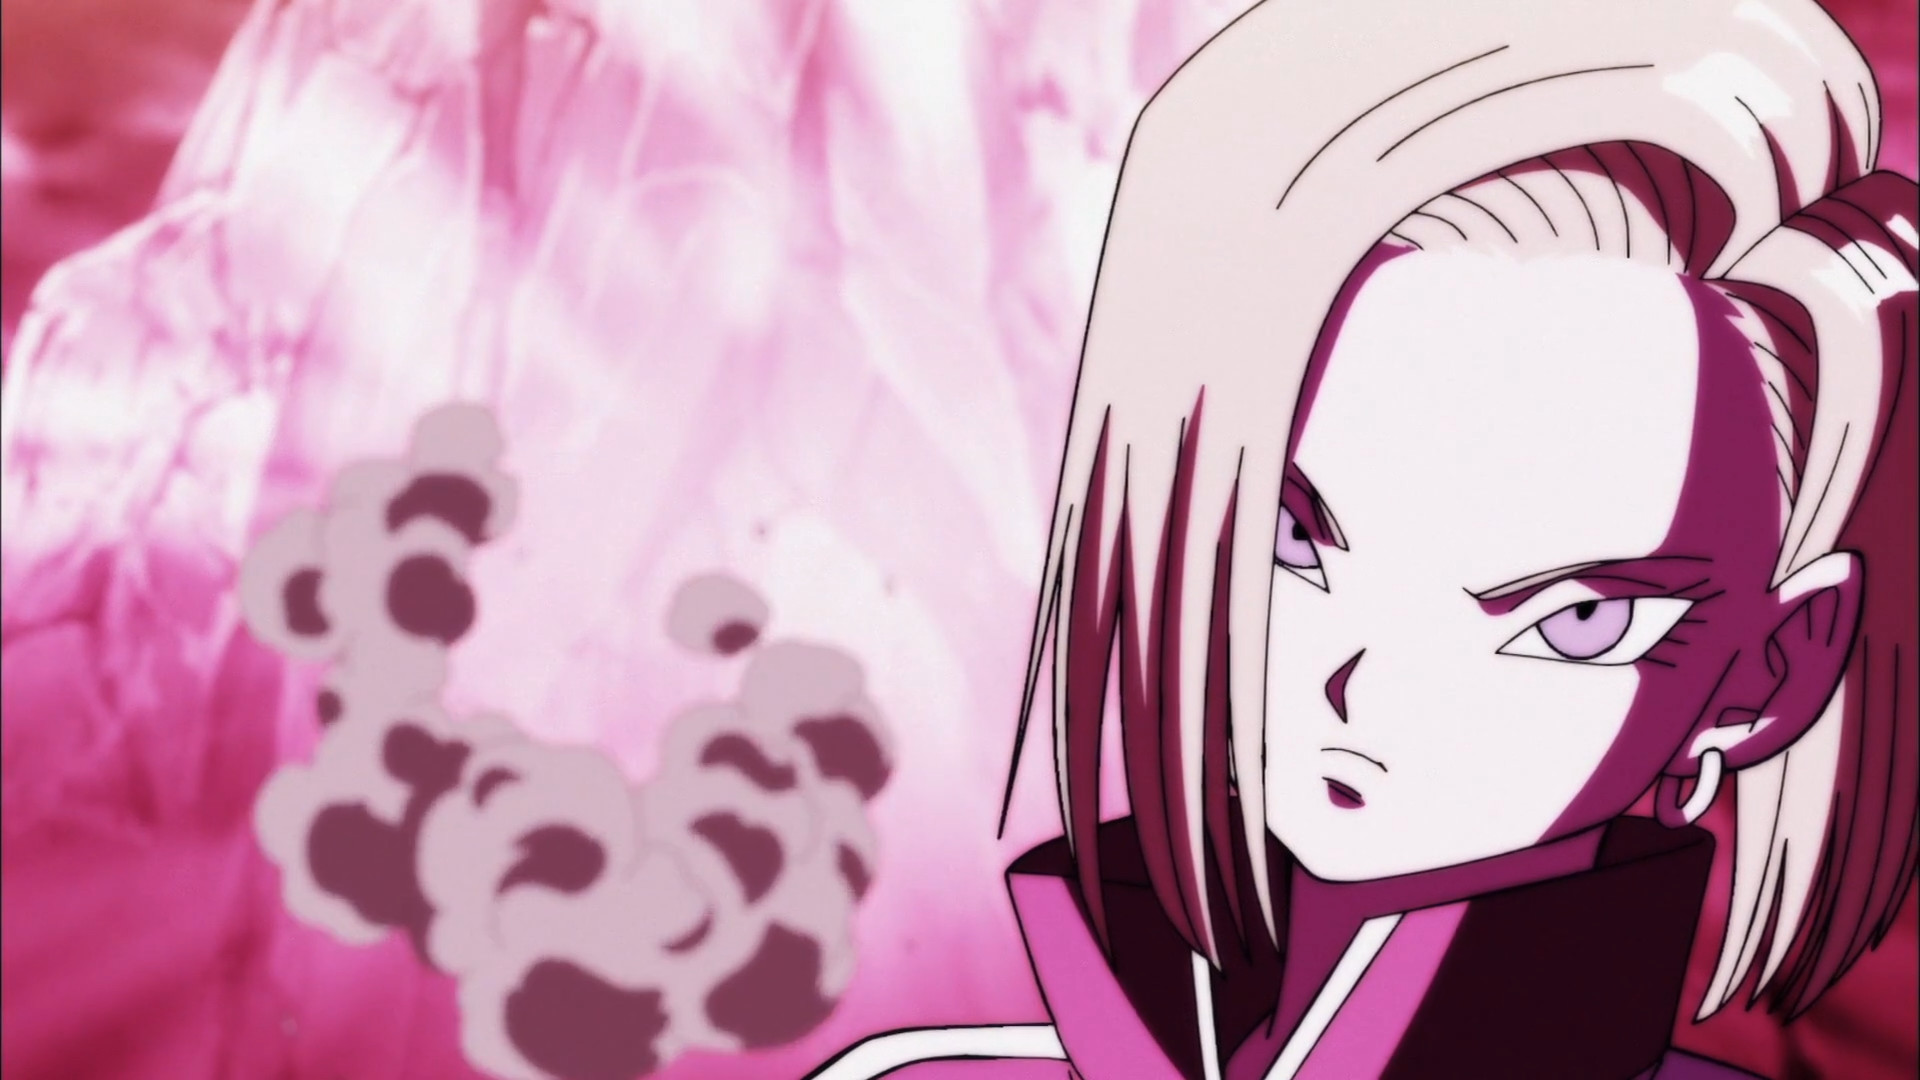 Android 18 Wallpaper 1920x1080